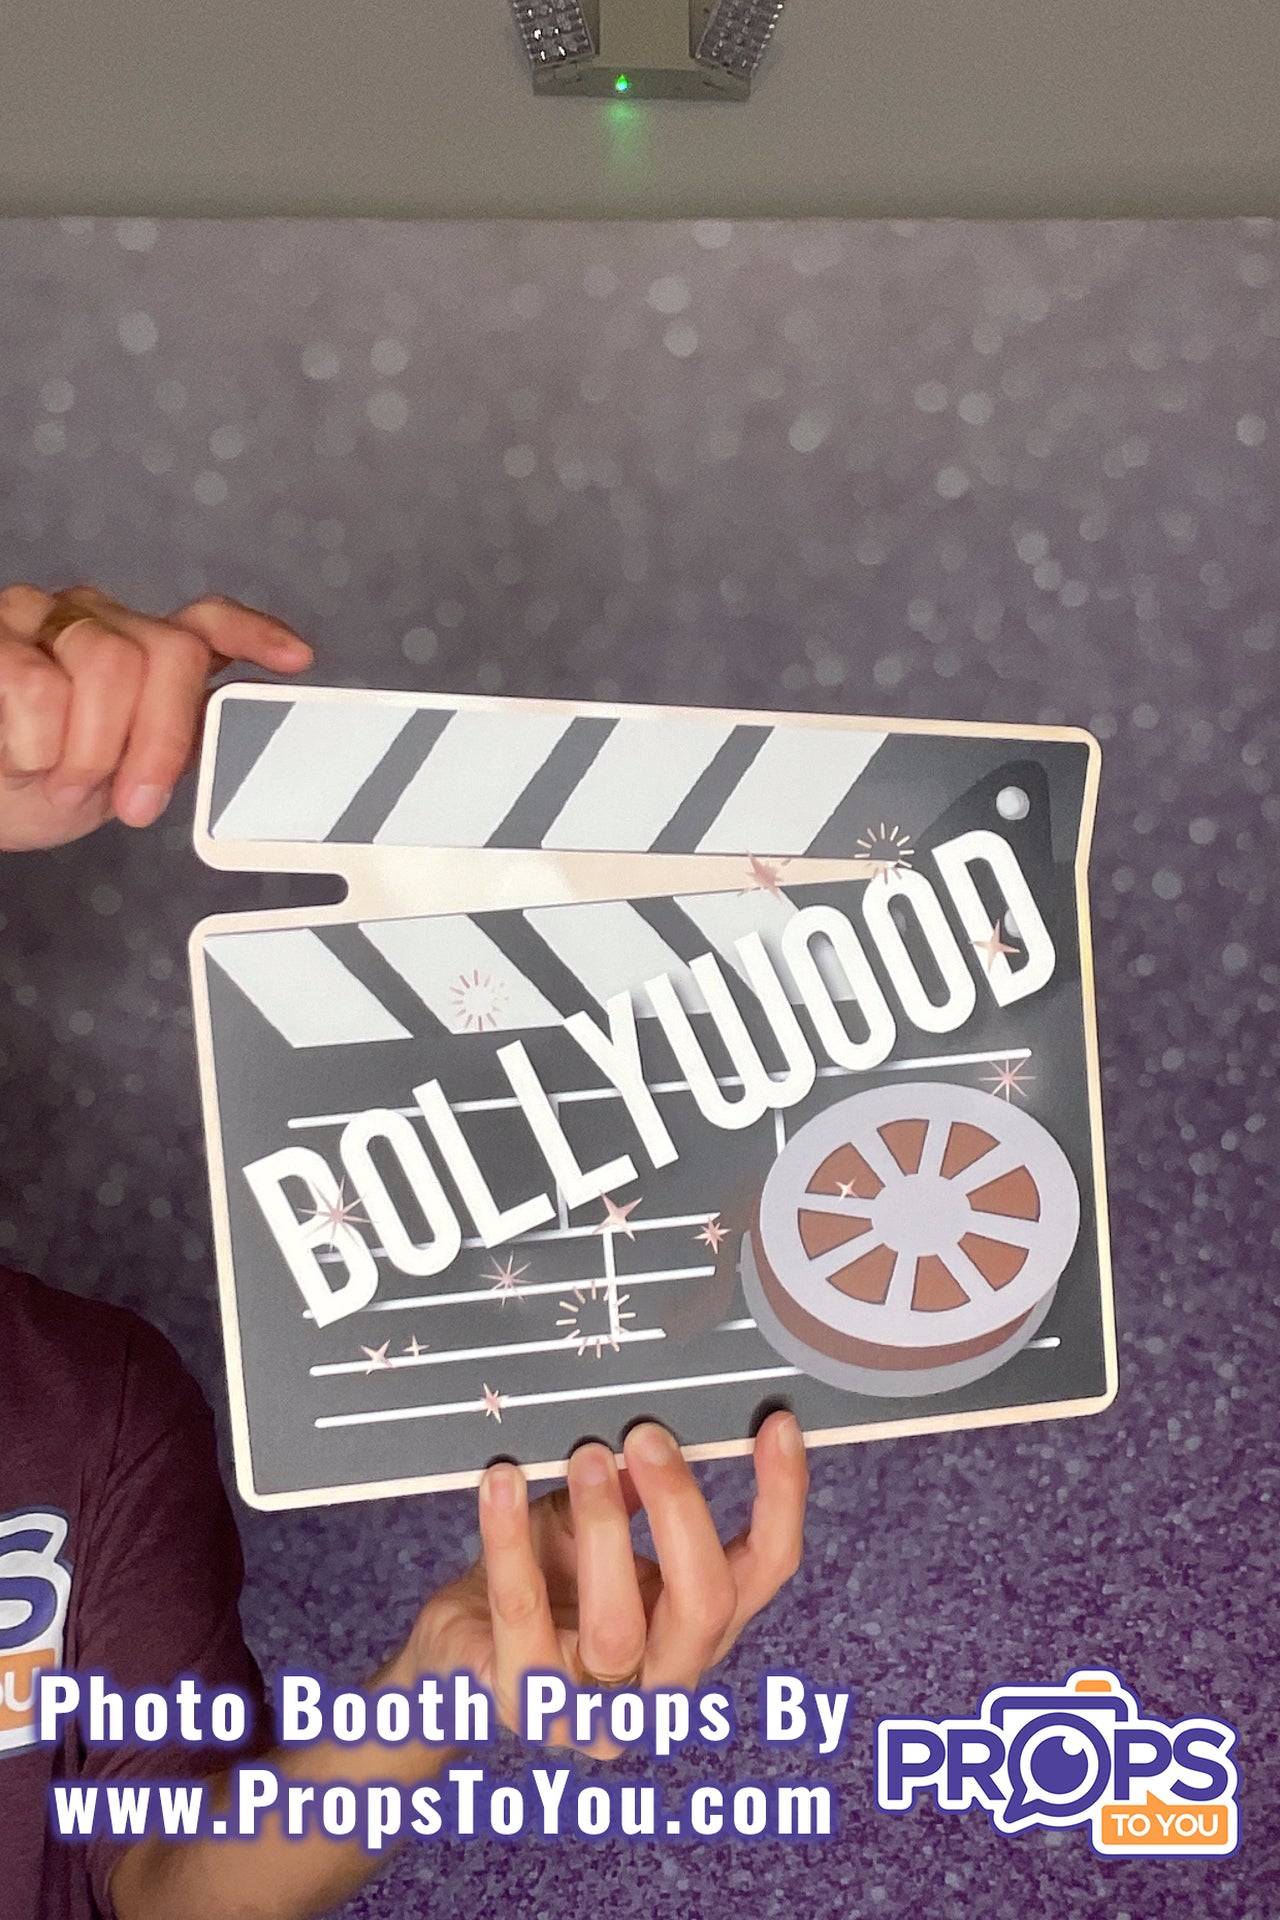 BUNDLE! Bollywood - 5 Double-Sided Photo Booth Props